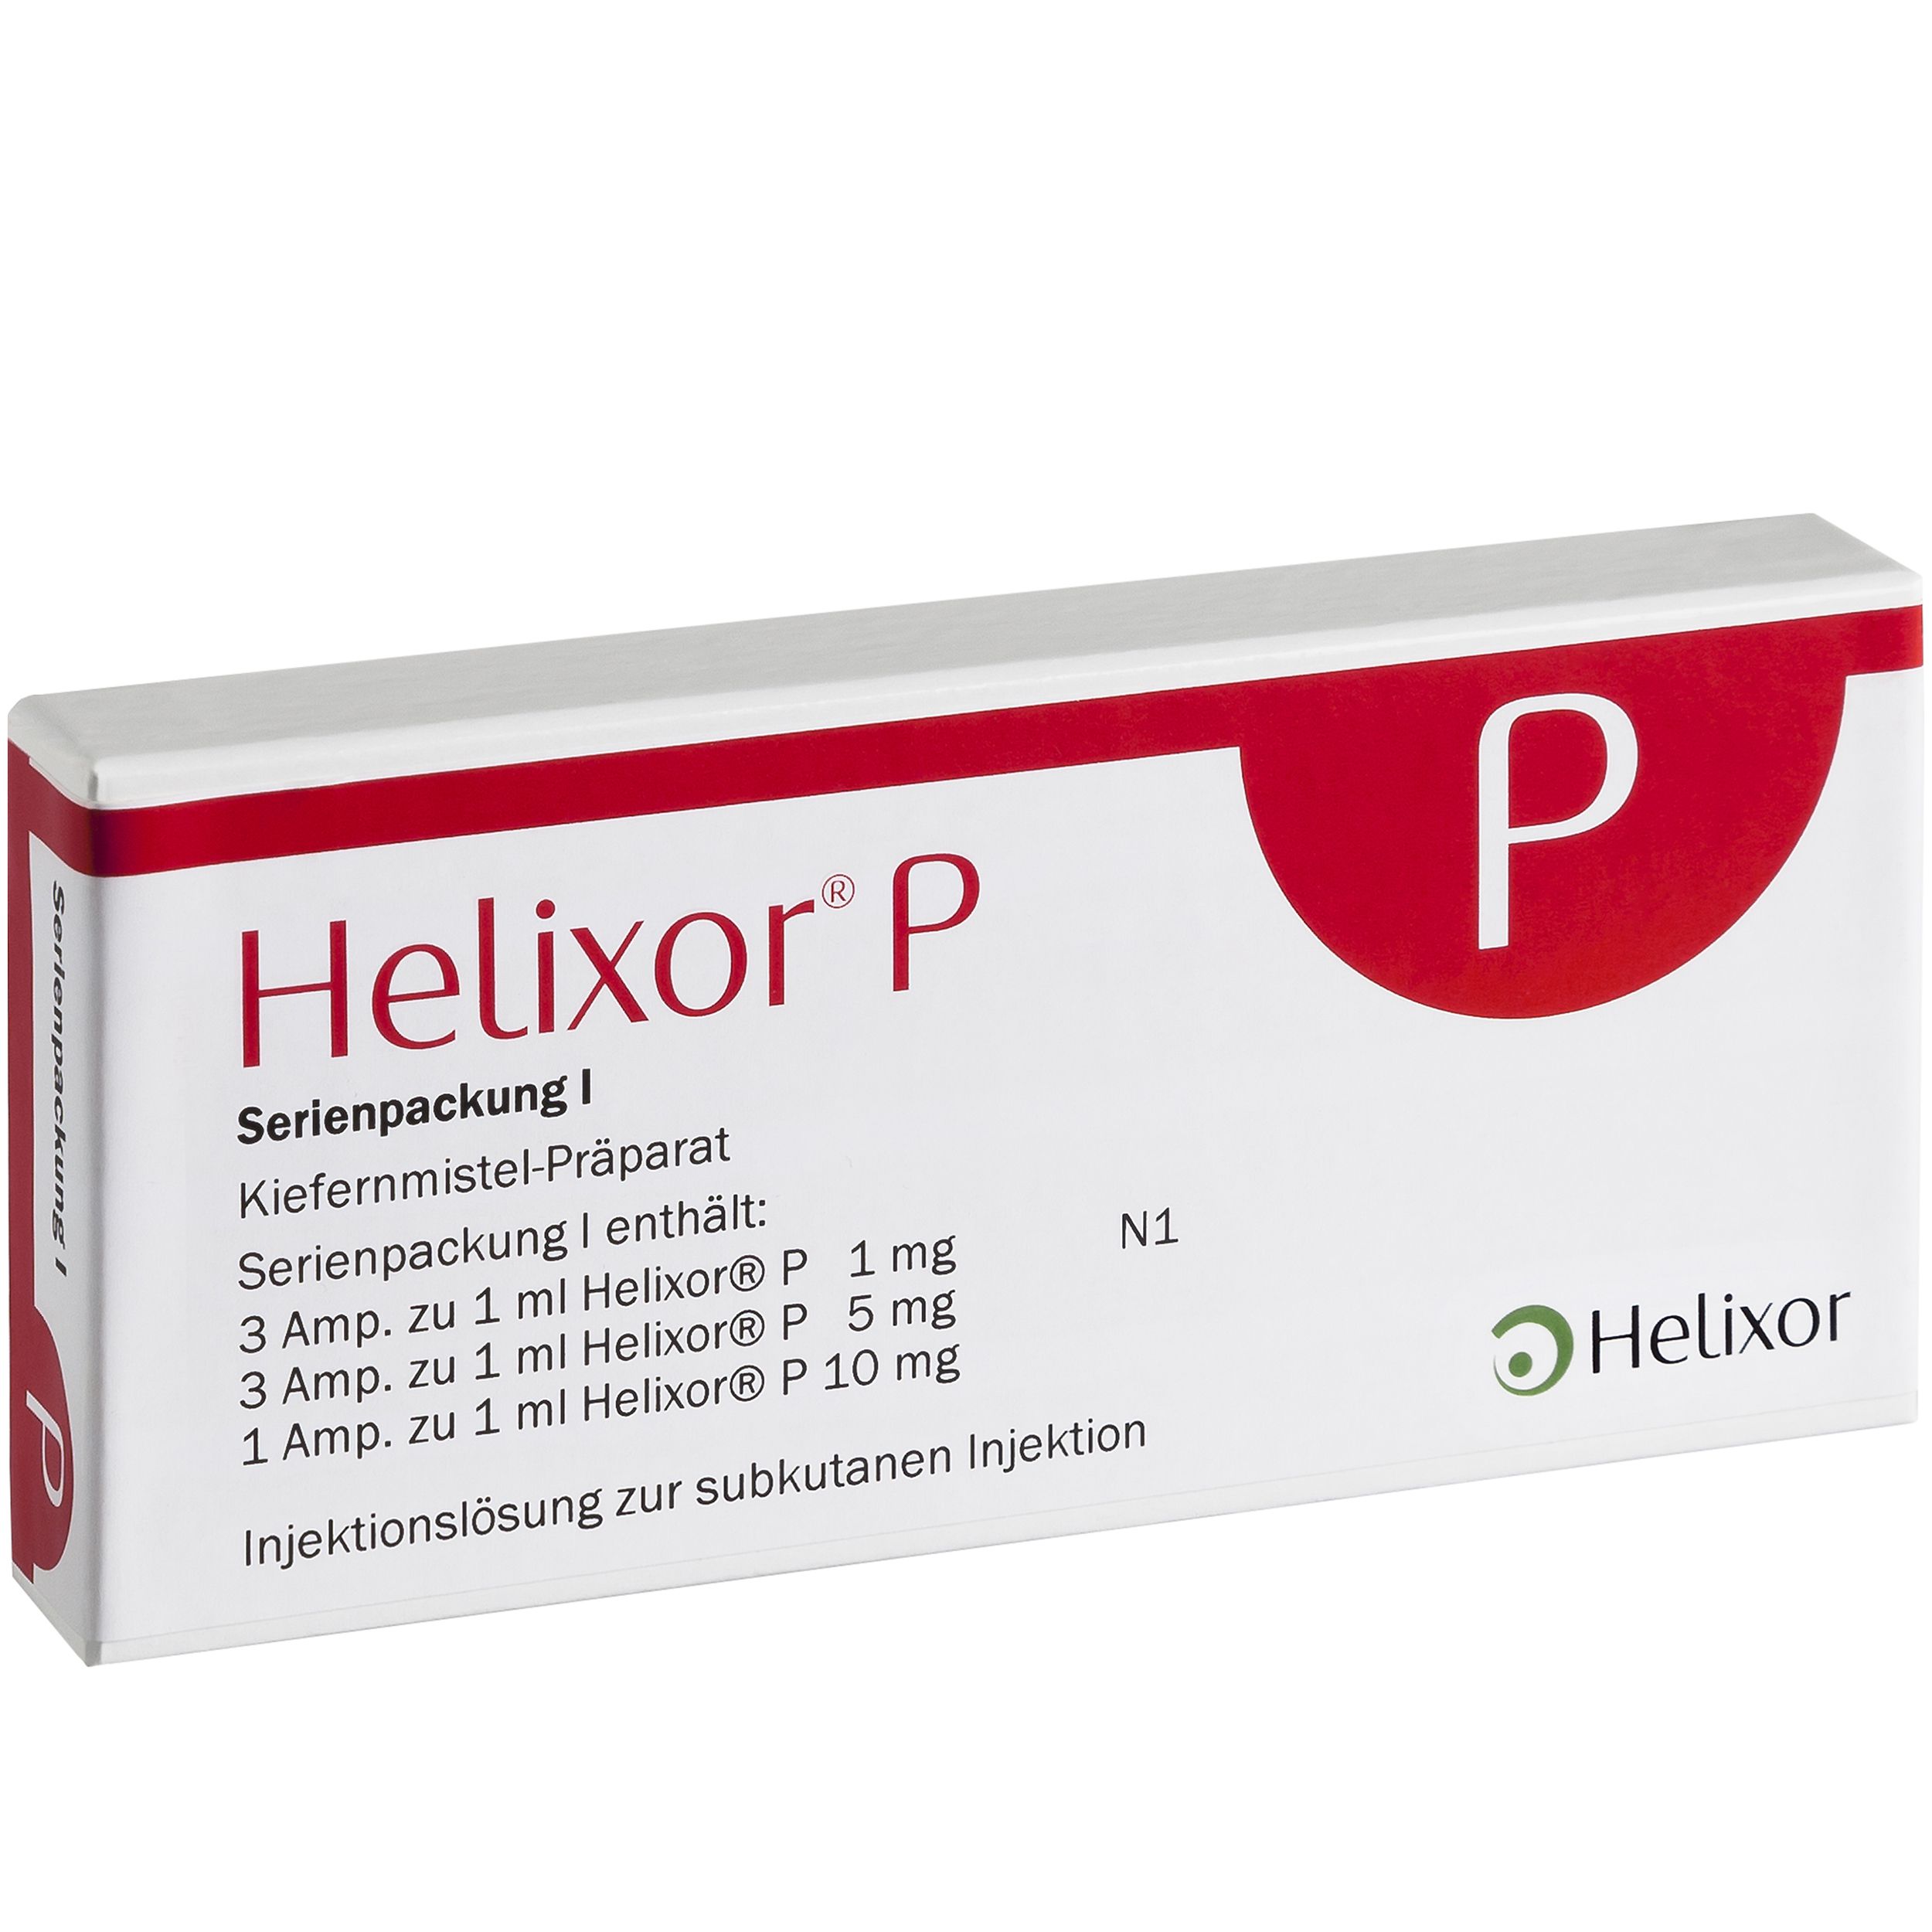 HELIXOR P series pack I ampoules